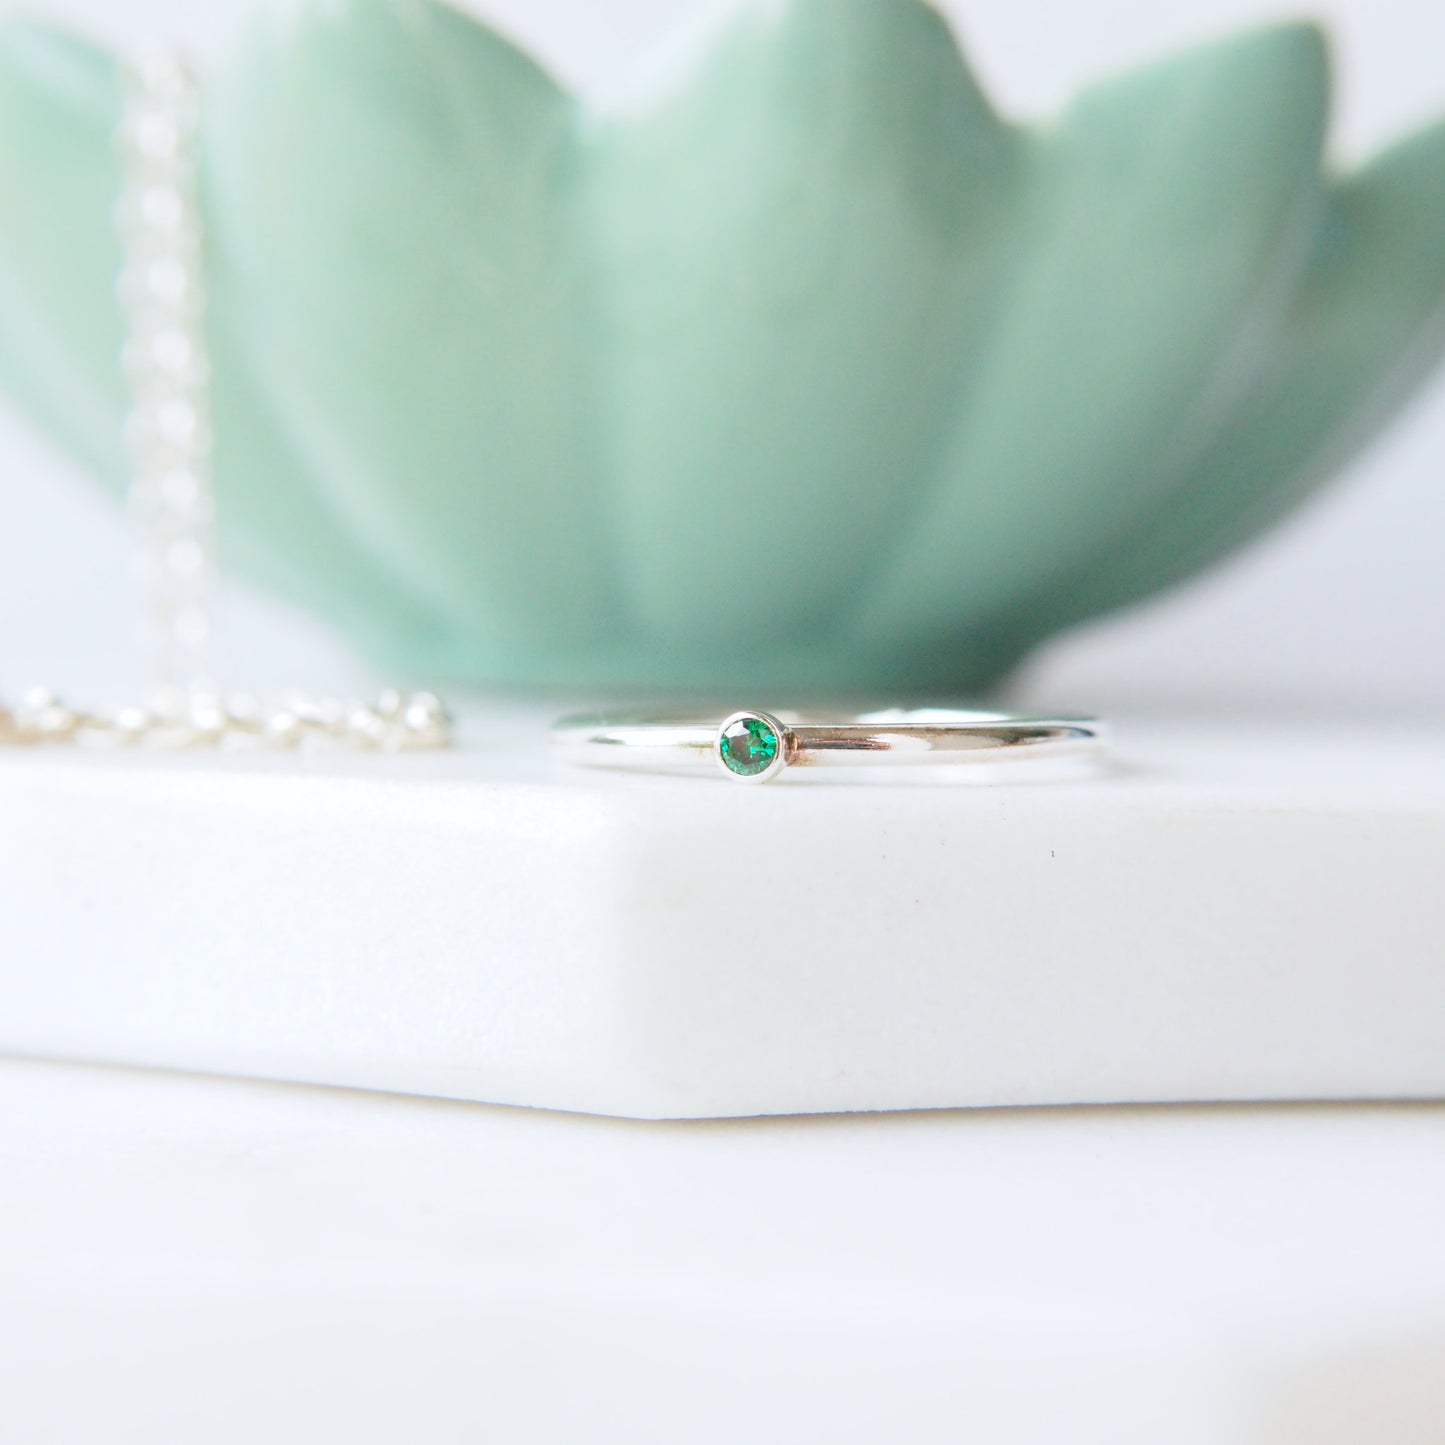 round band silver ring with a very small 2mm emerald cubic zirconia. Handmade by maram jewellery. shown on a white marble slab with a green jewellery bowl in the background, Made in Scotland